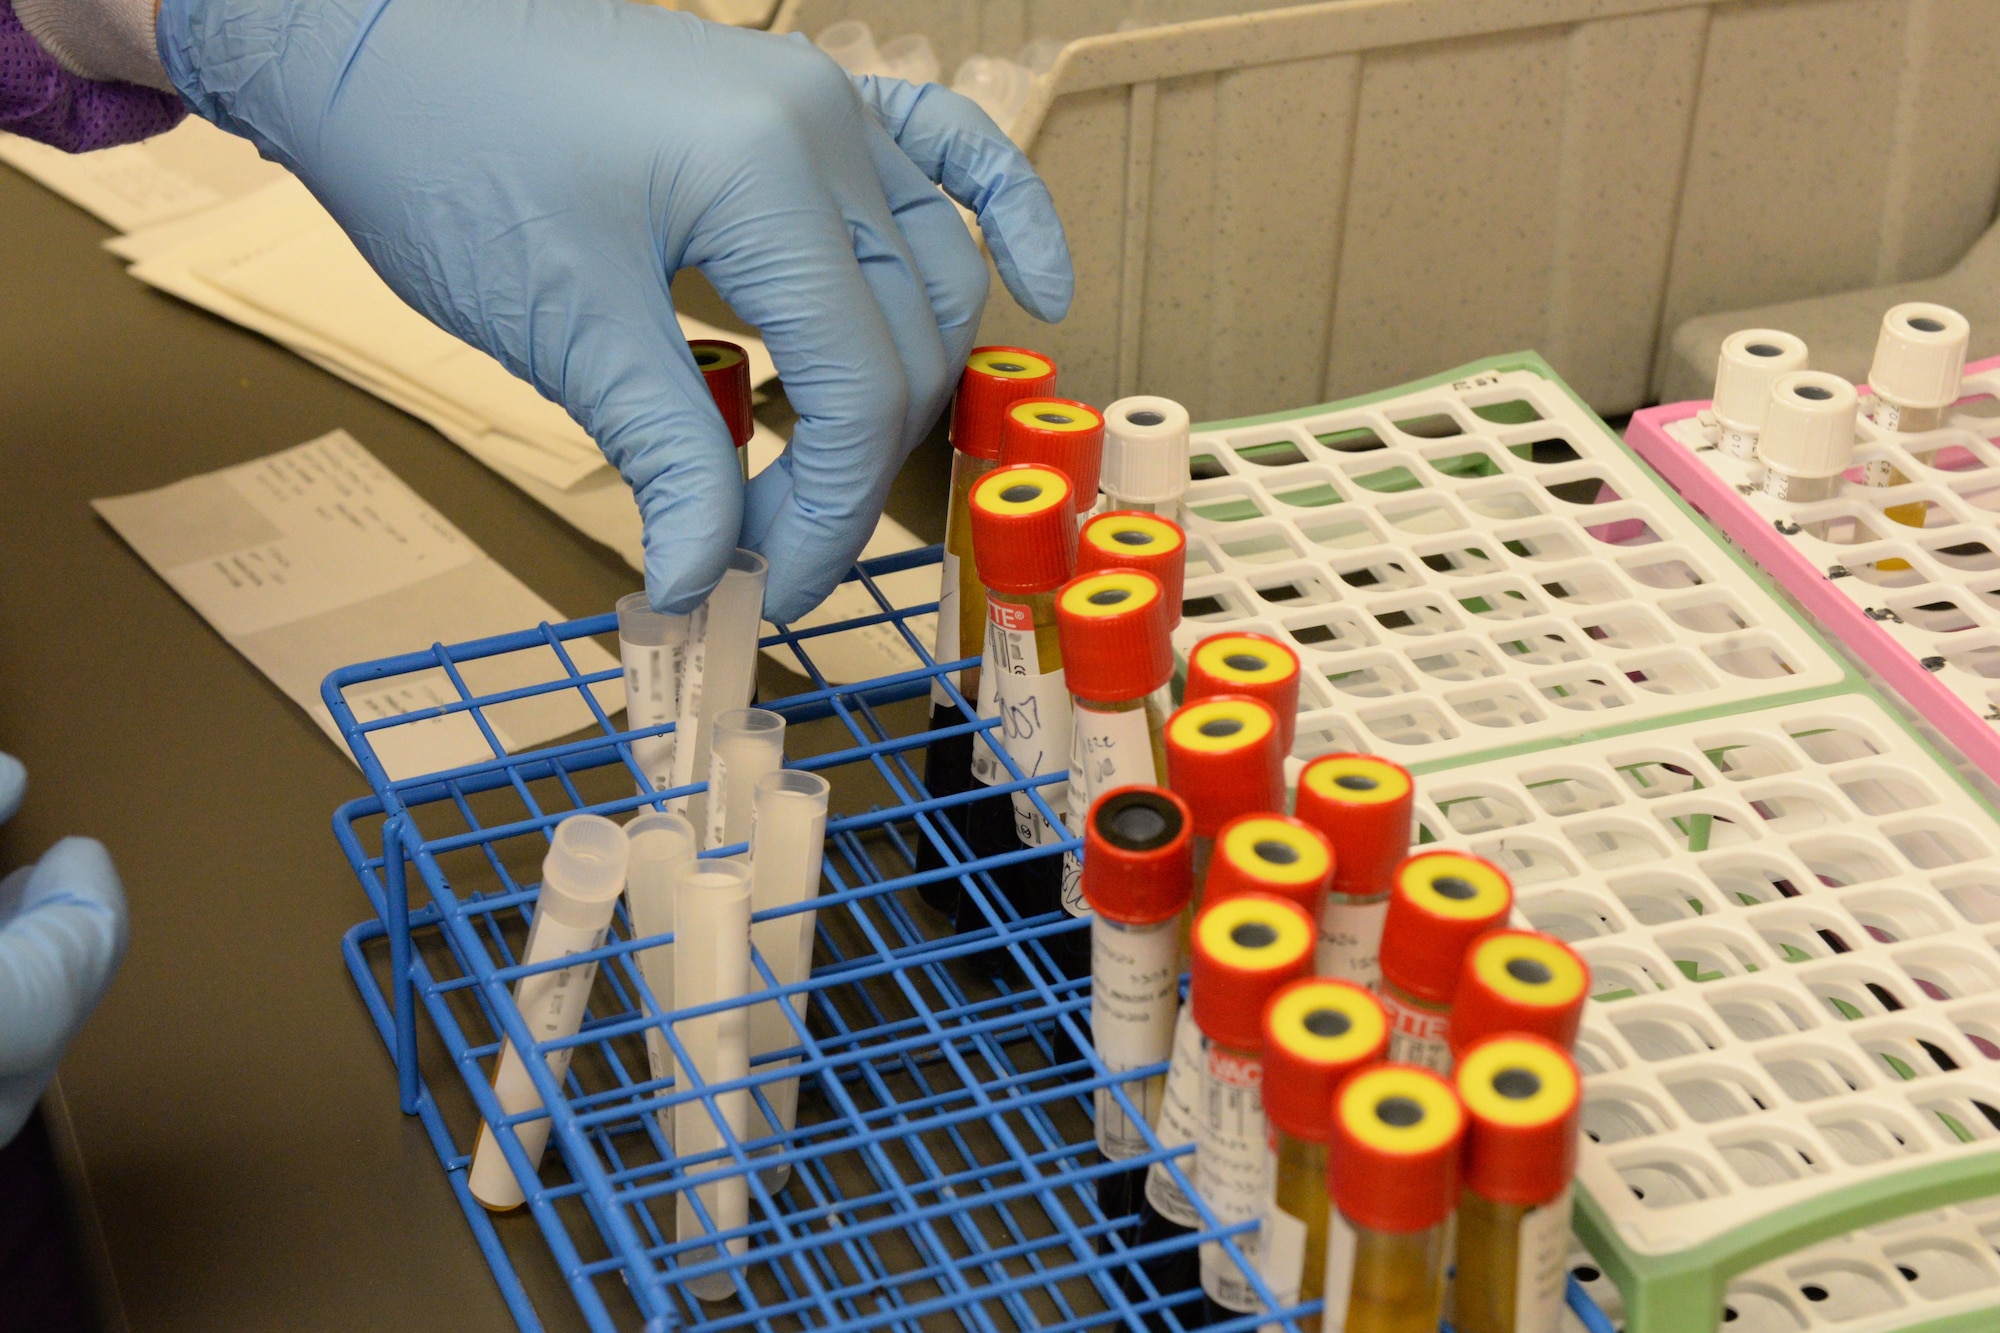 Airman 1st Class Kristen Lowder, a medical laboratory technician assigned to the 28th Medical Support Squadron, sorts through different blood samples inside the medical laboratory at Ellsworth Air Force Base, S.D., April 24, 2017. The samples are tested for different infections, blood types and drug use. (U.S. Air Force photo by Airman Nicolas Z. Erwin)